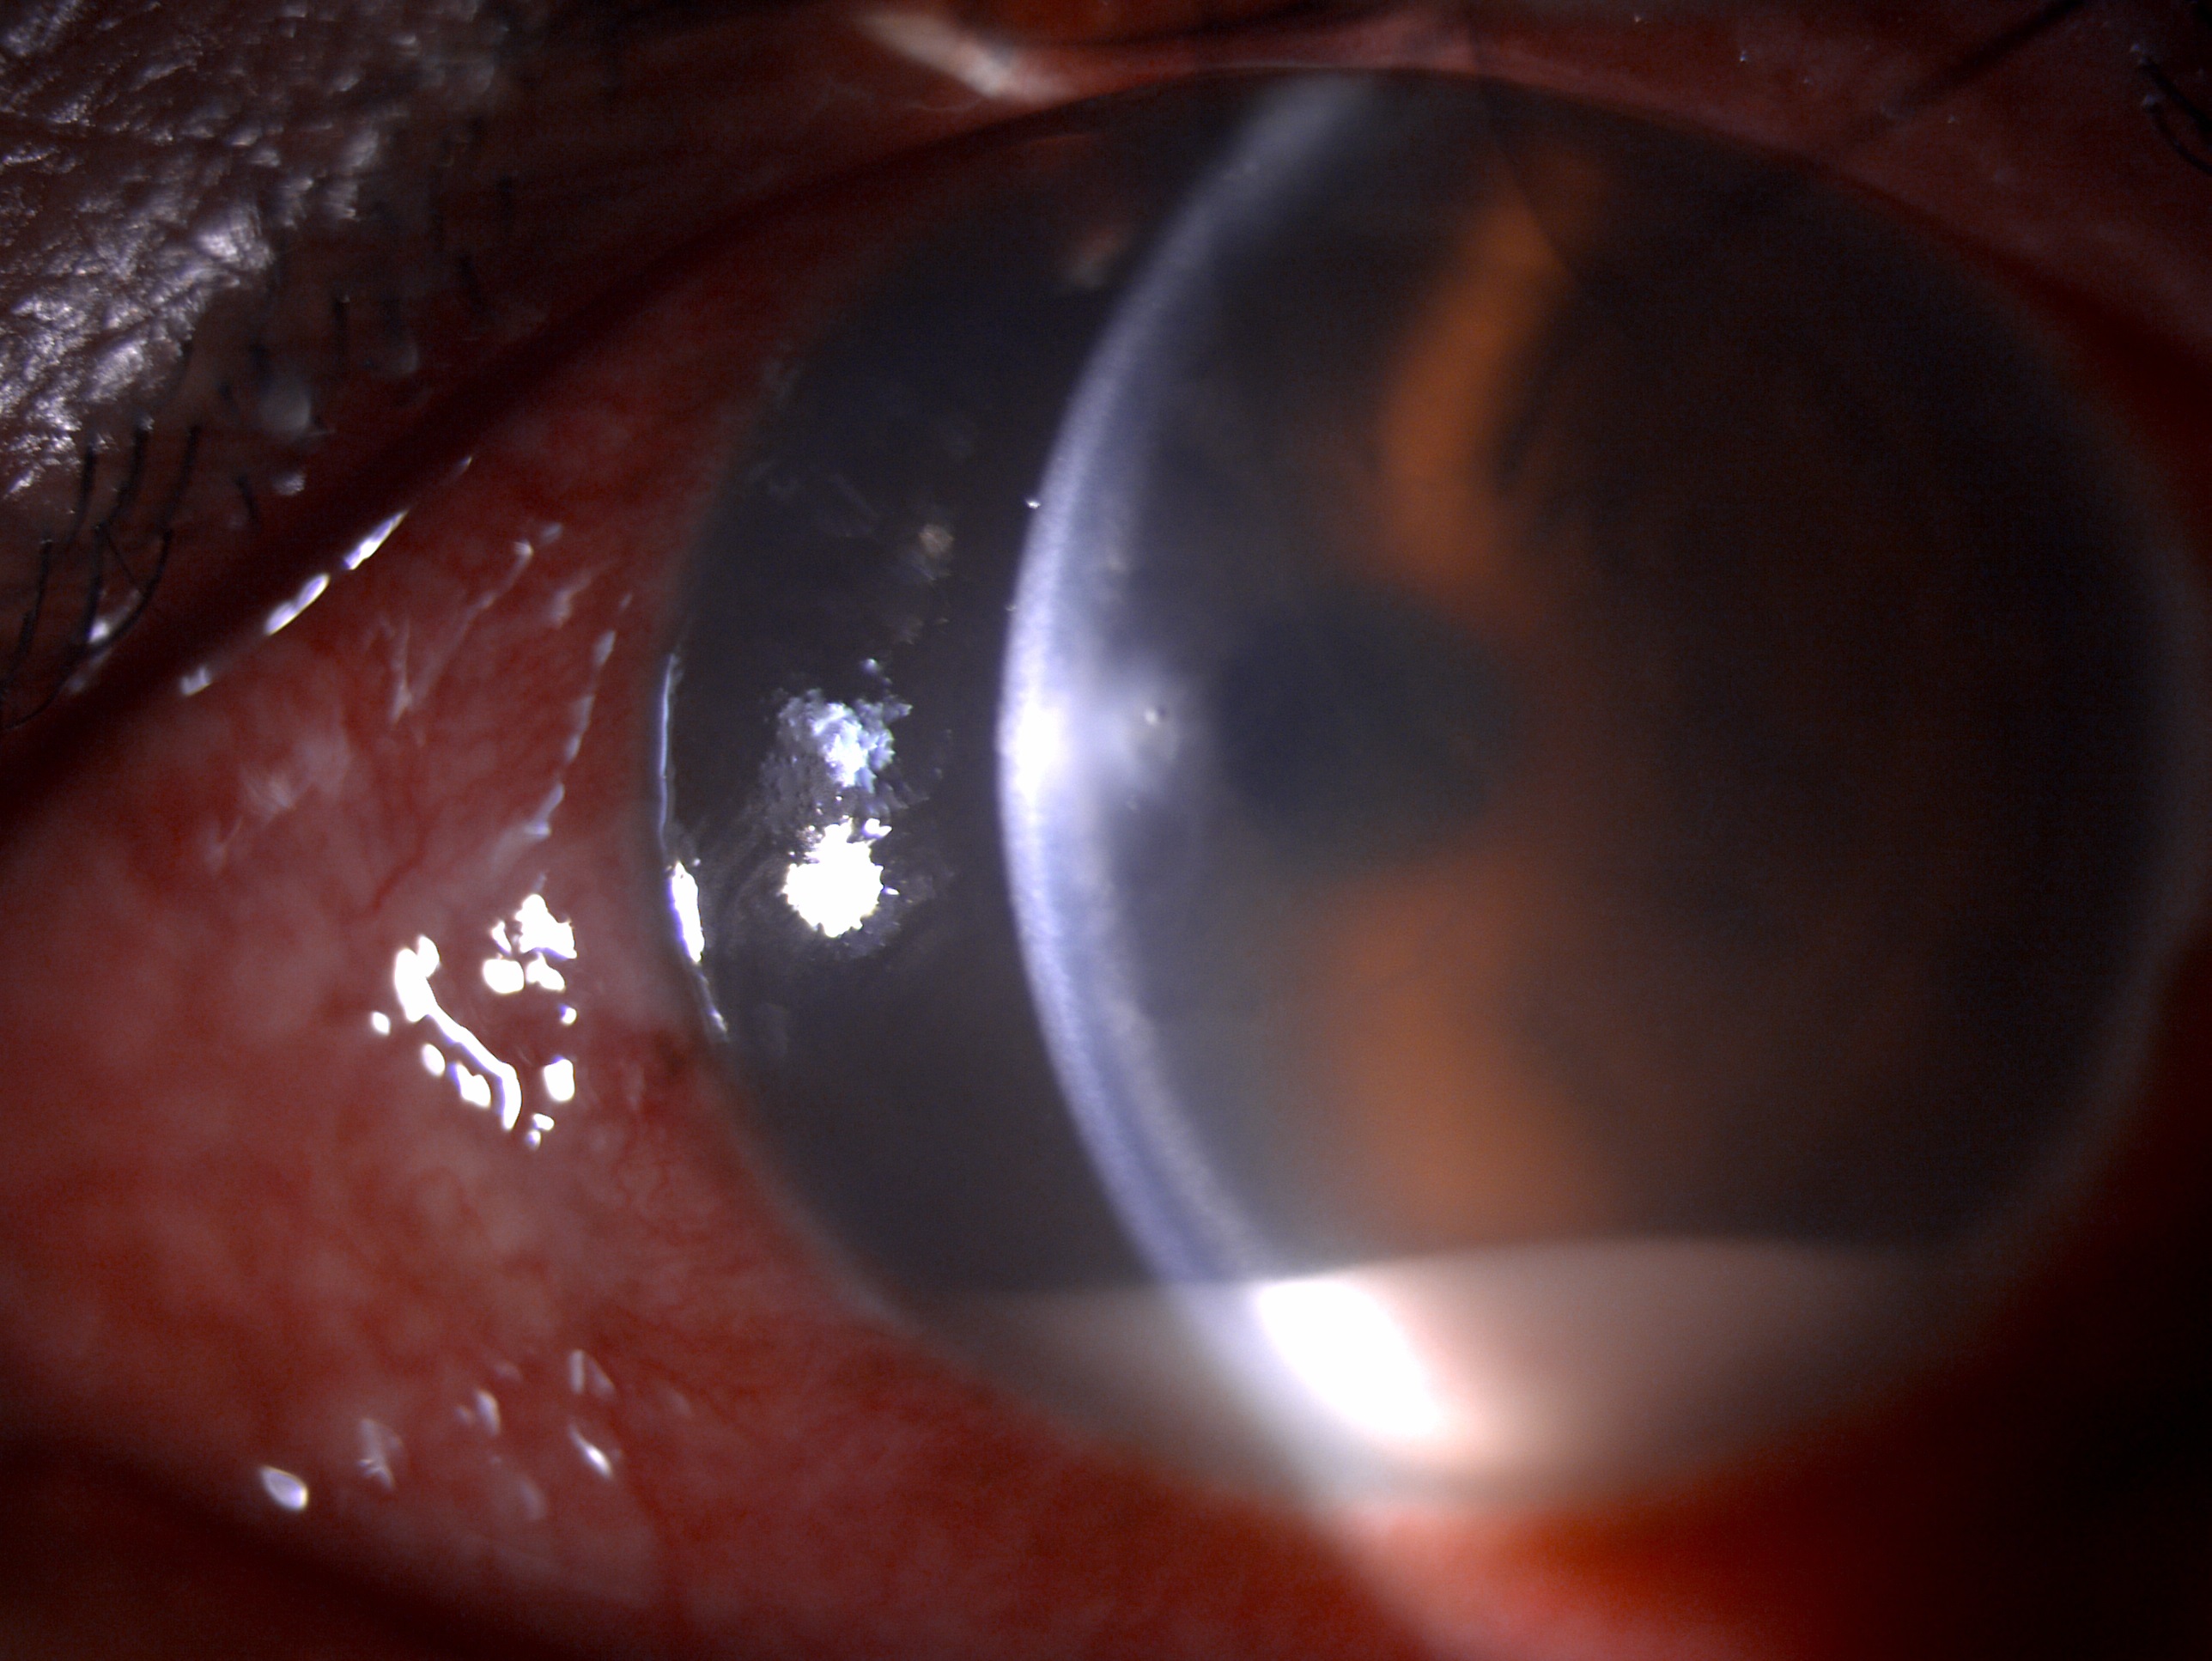 Slit lamp image depicting diffuse conjunctival congestion, 2x2 mm circular anterior stromal corneal infiltrate, stromal edema